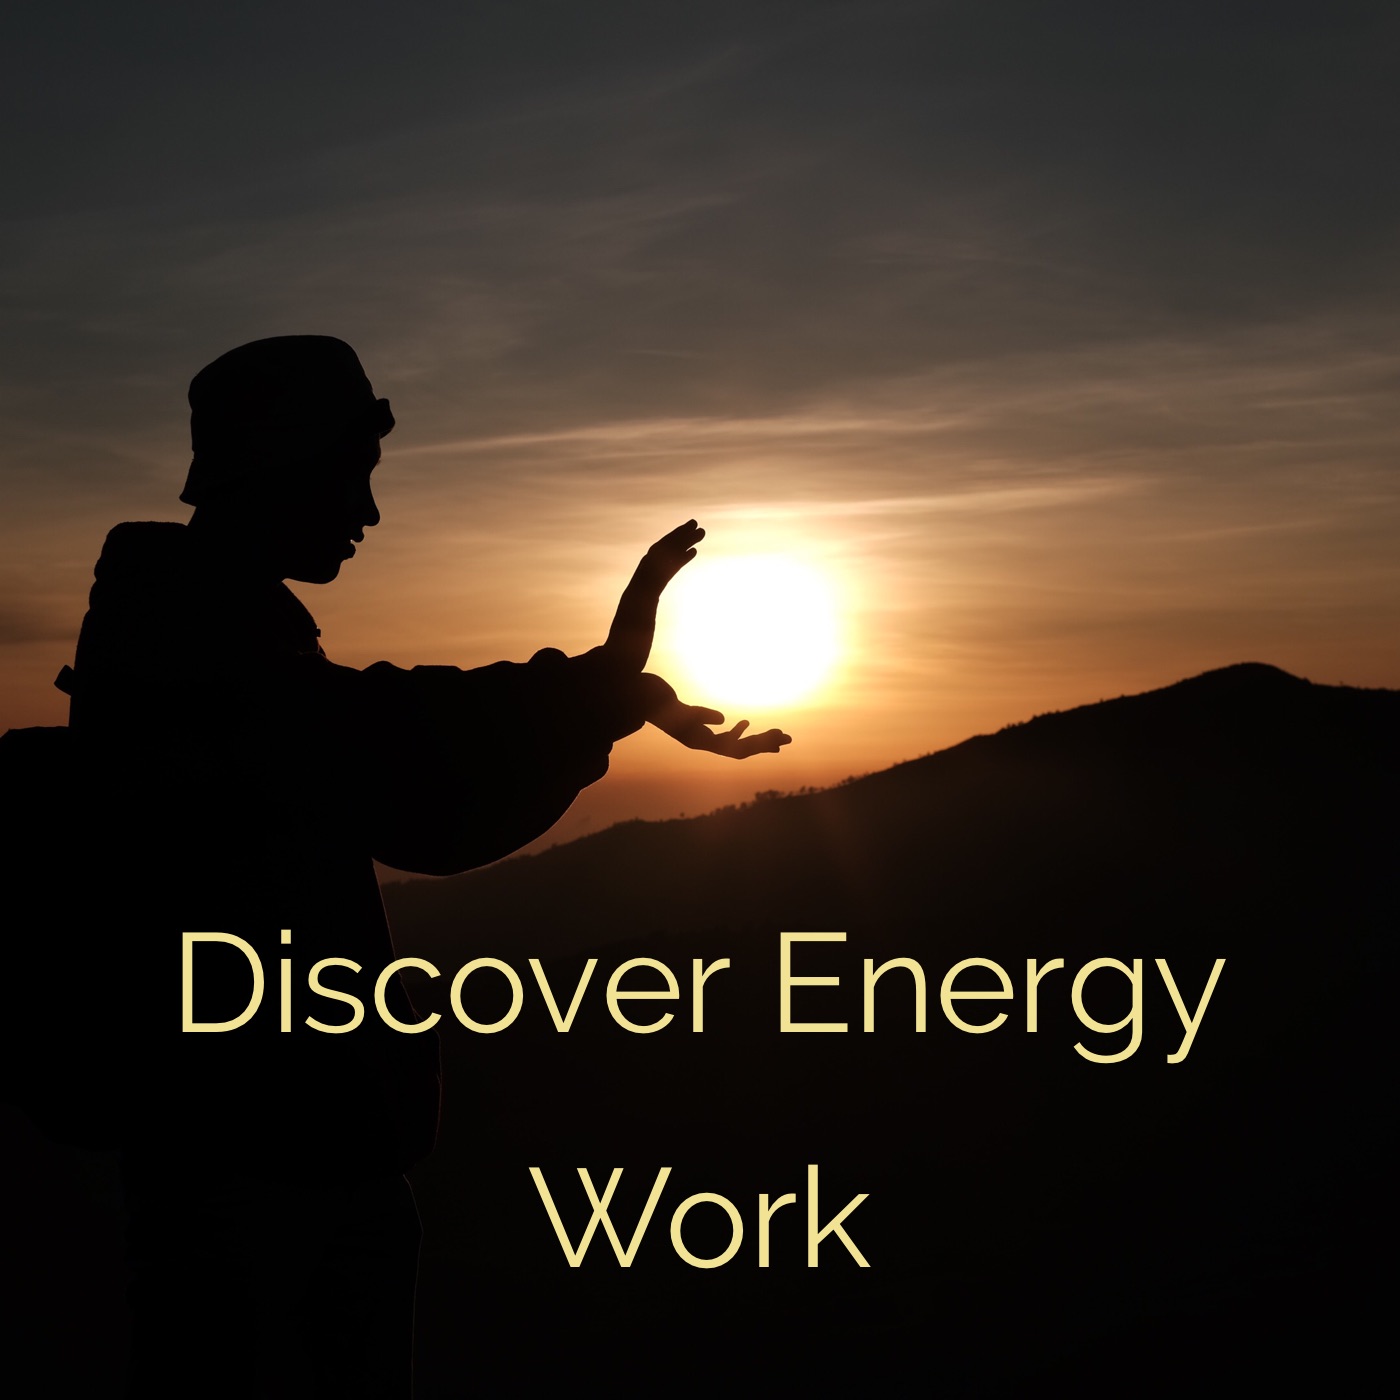 Discover Energy Work